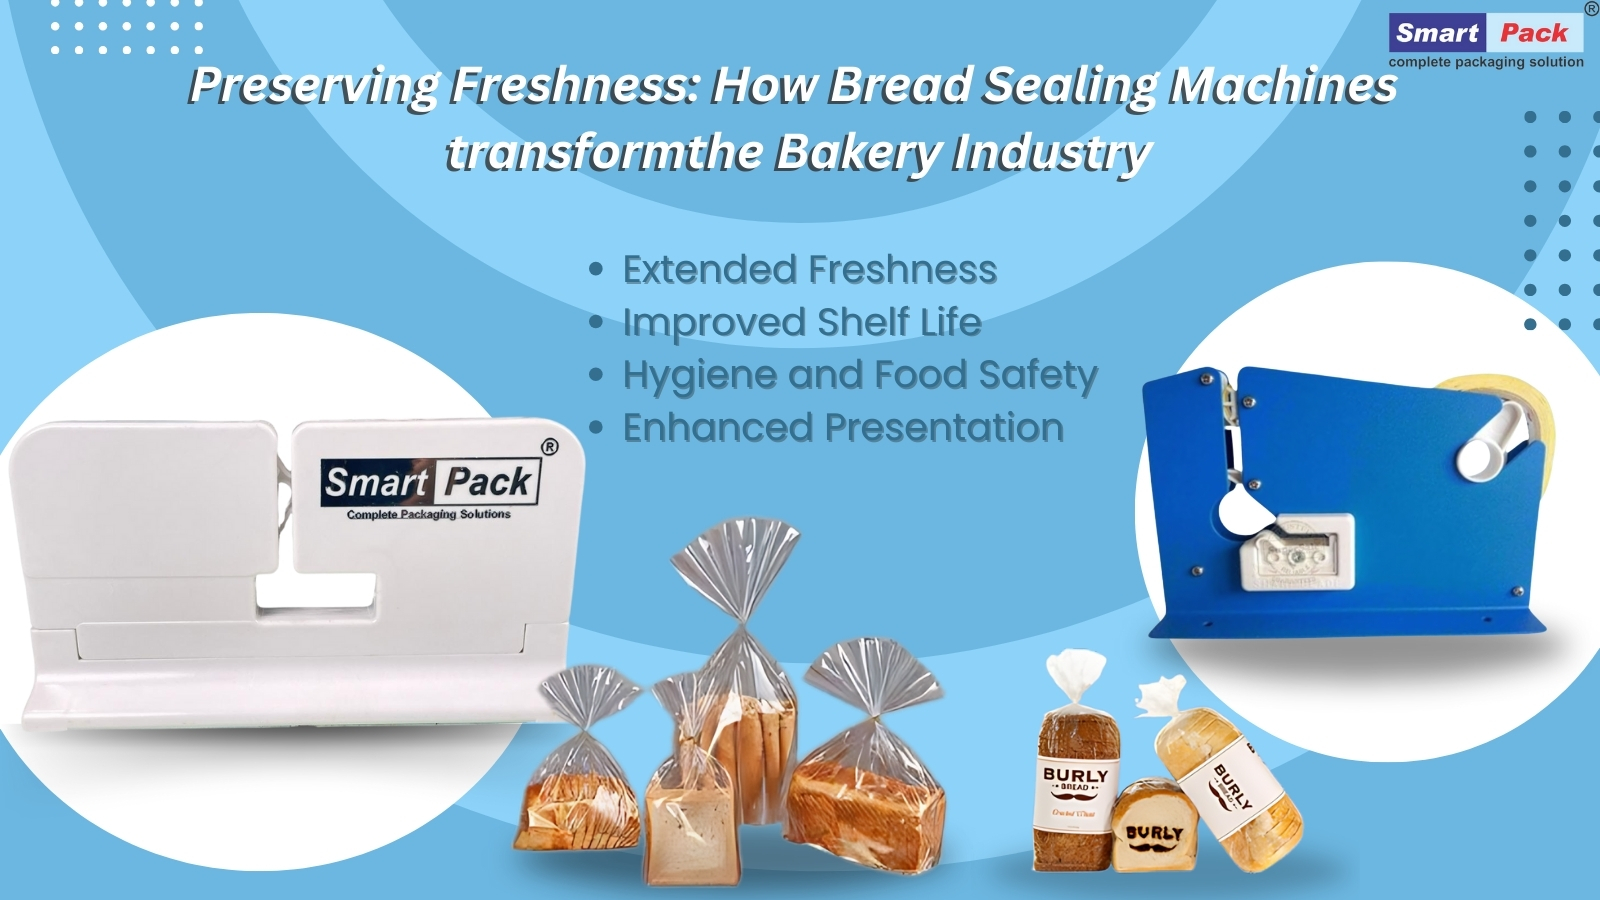 Preserving Freshness: How Bread Sealing Machines transform the Bakery Industry